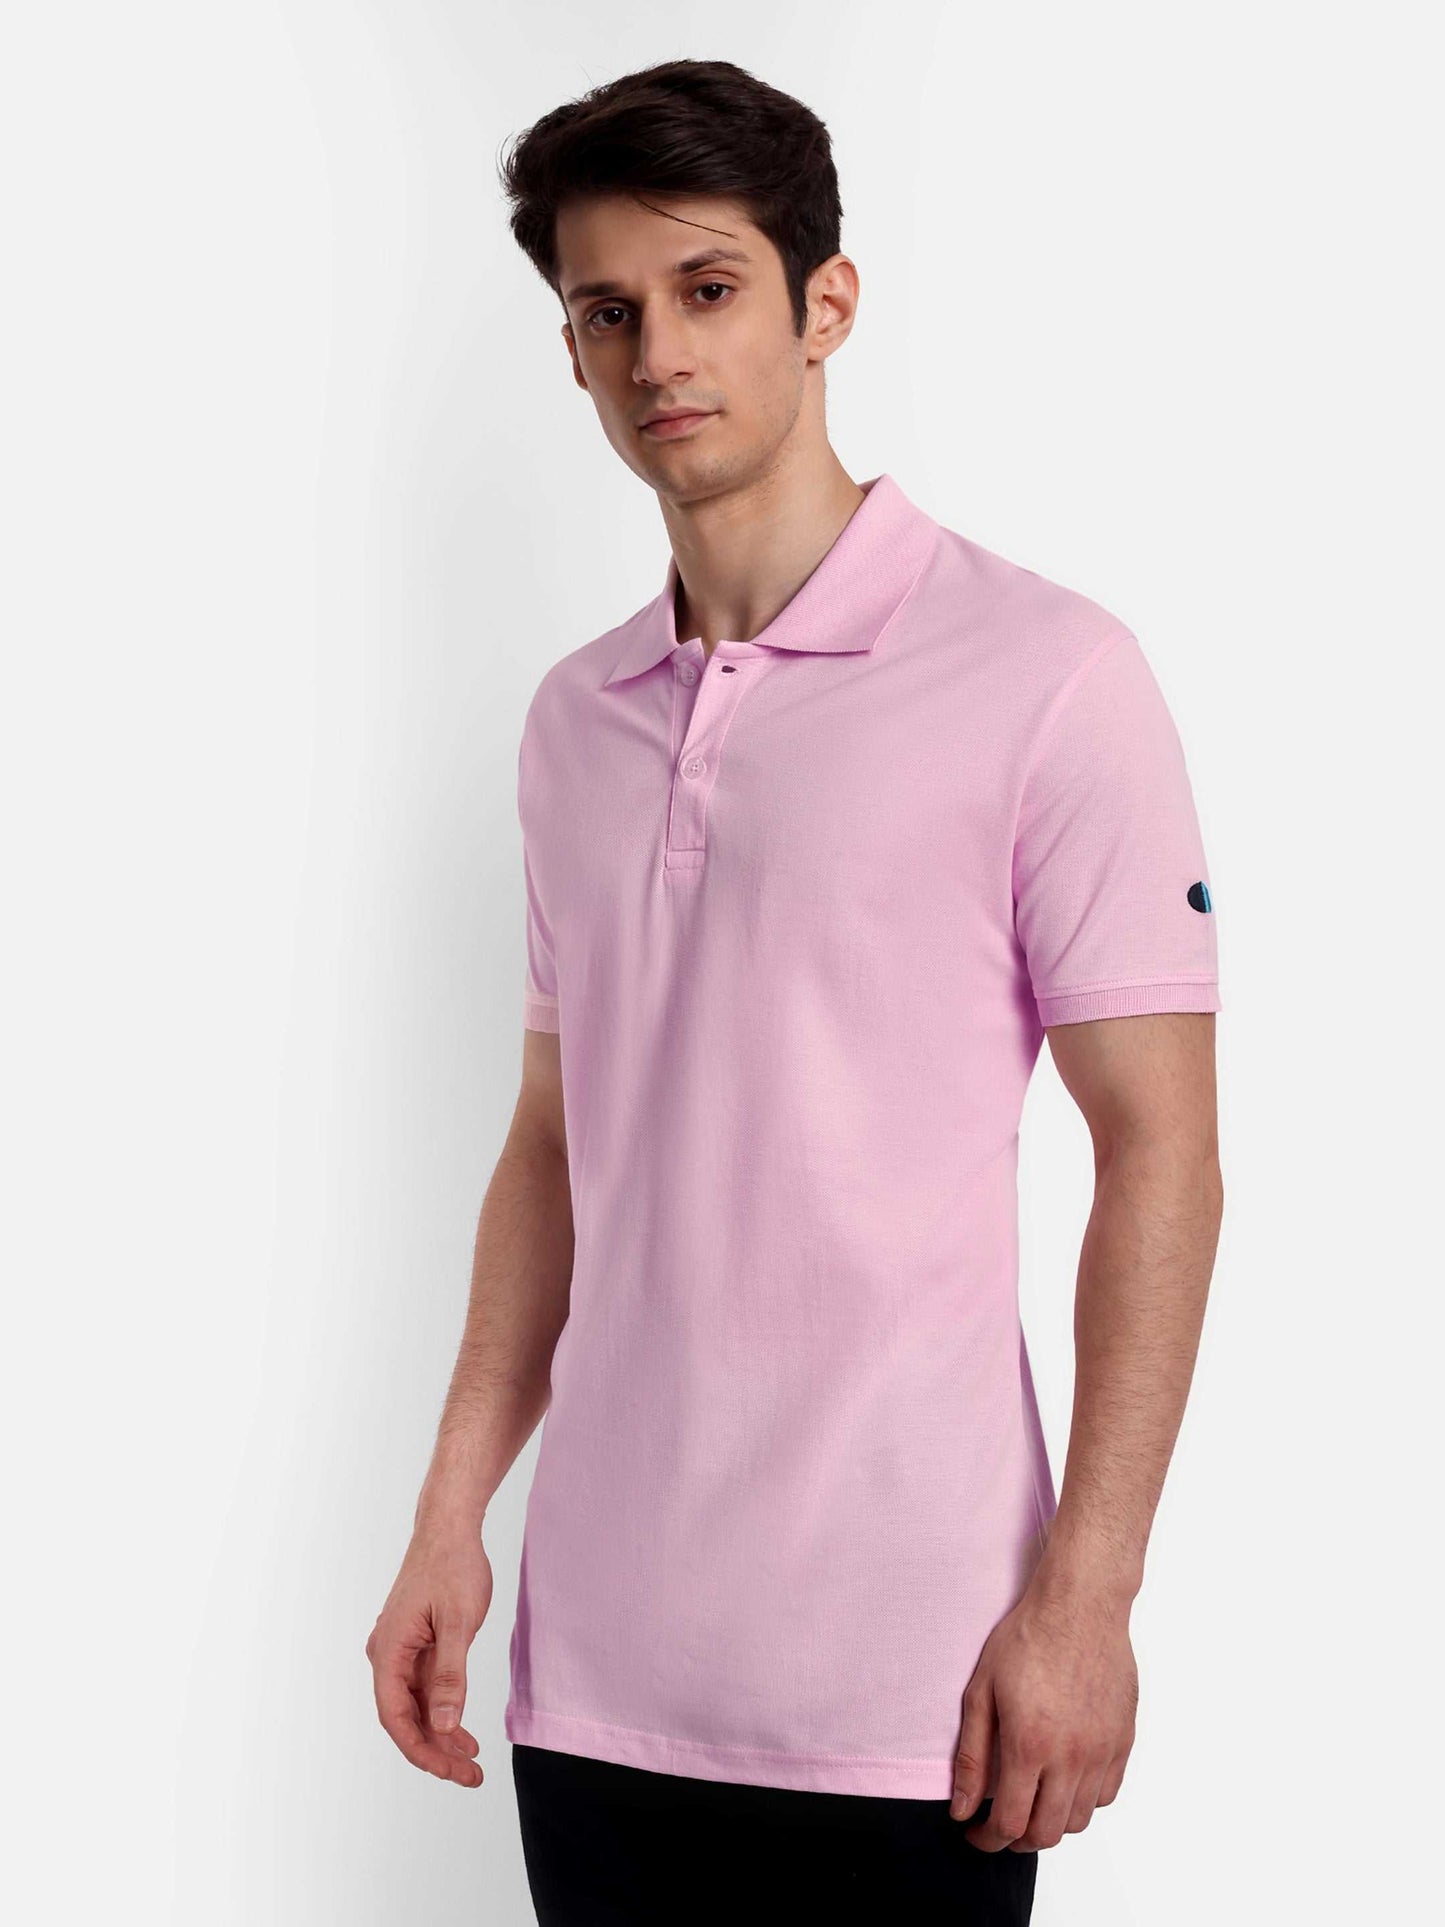 Shop polo t-shirts for men at best prices